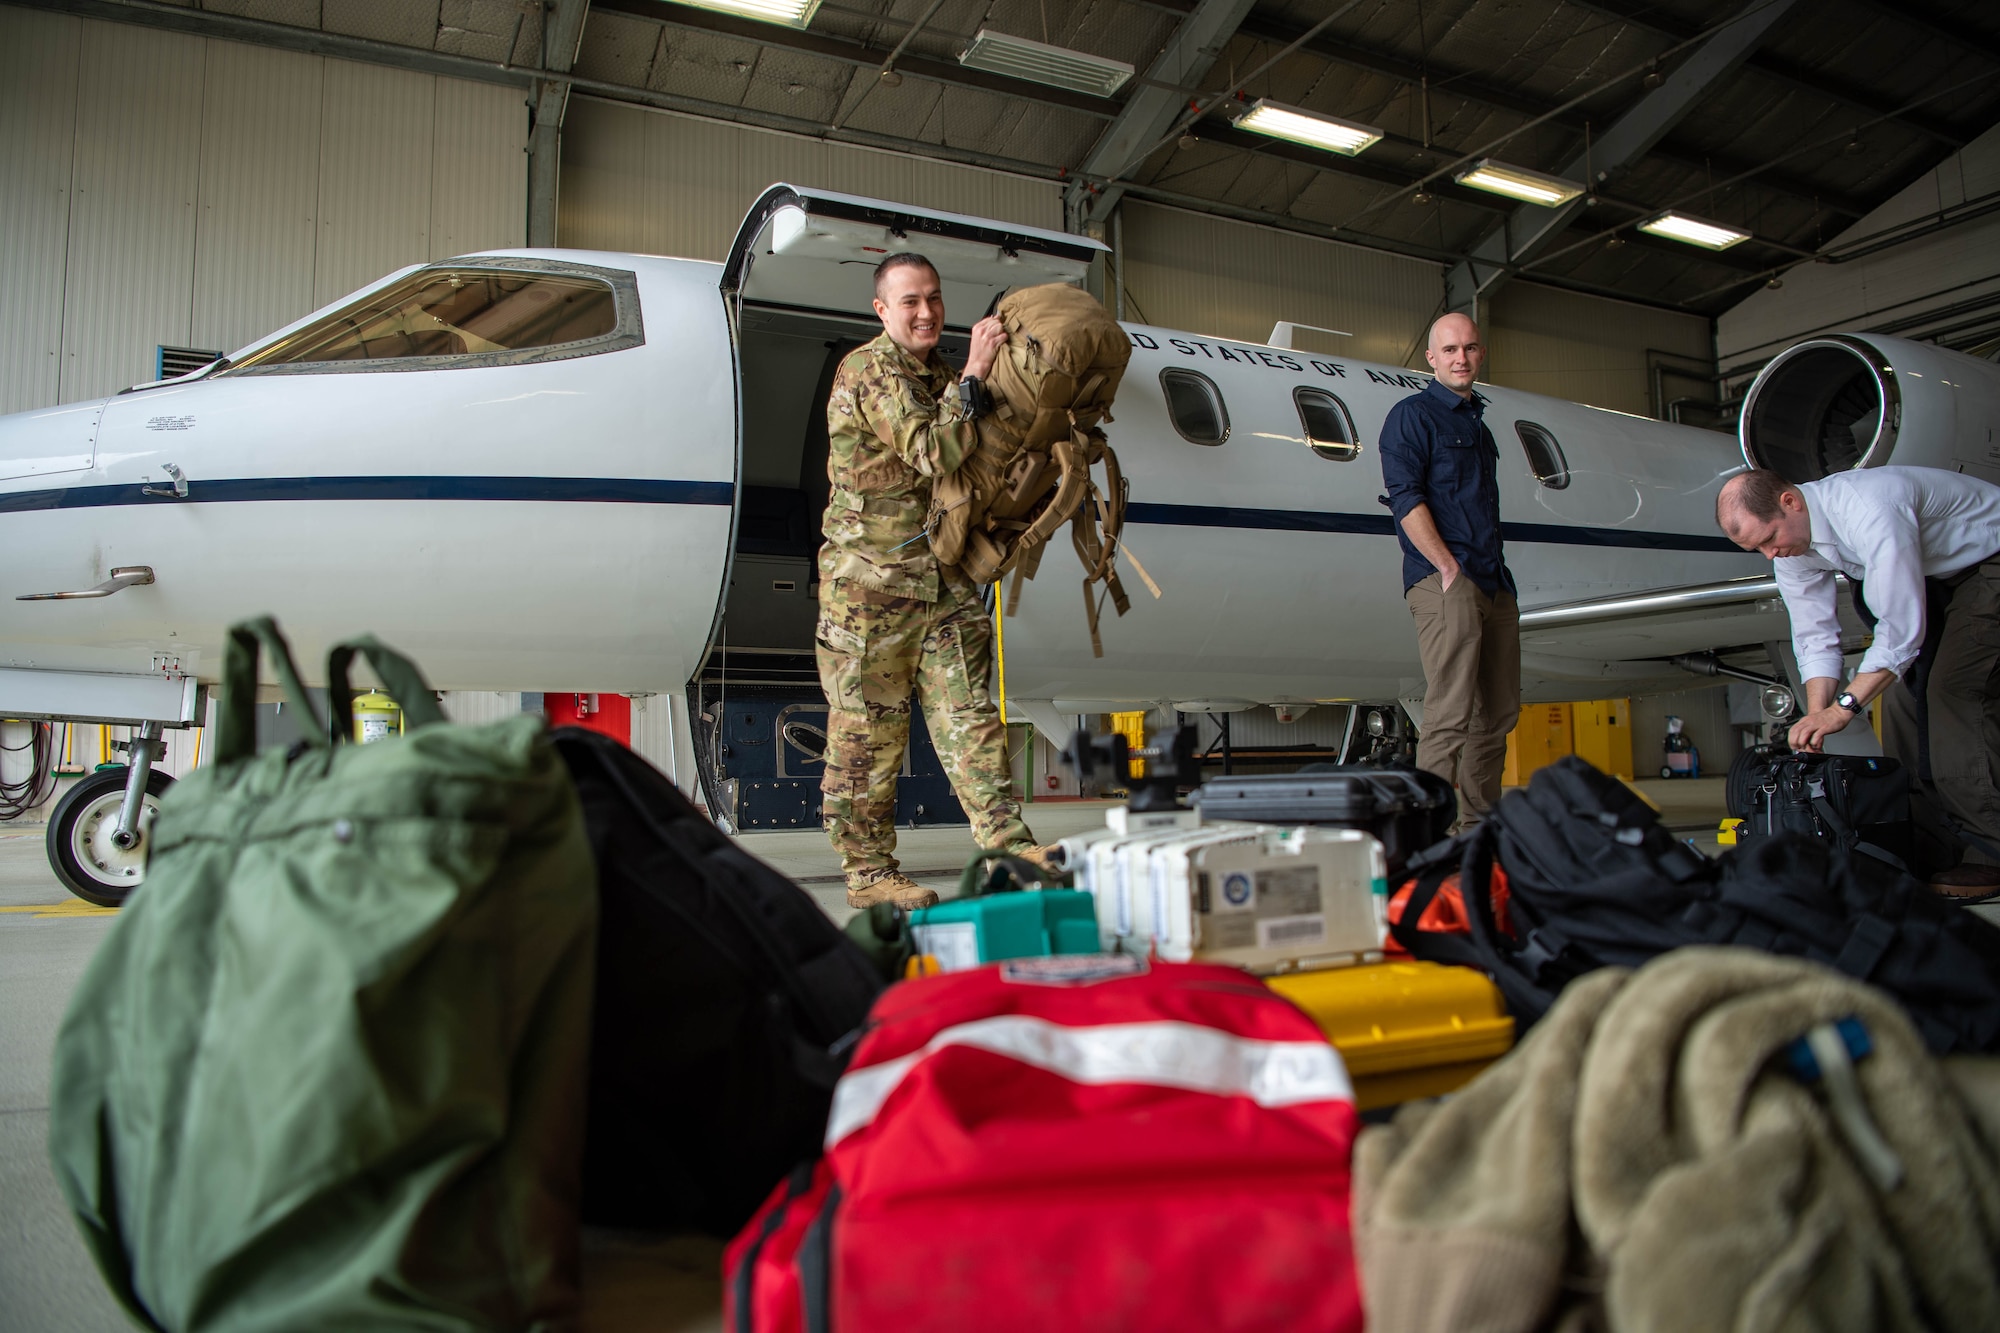 Tech. Sgt. Brendon Bowman, 86th Aeromedical Evacuation Squadron flight examiner and emergency medical paramedic, unloads medical equipment from a C-21 Learjet at Ramstein Air Base, Germany, April 6, 2023.